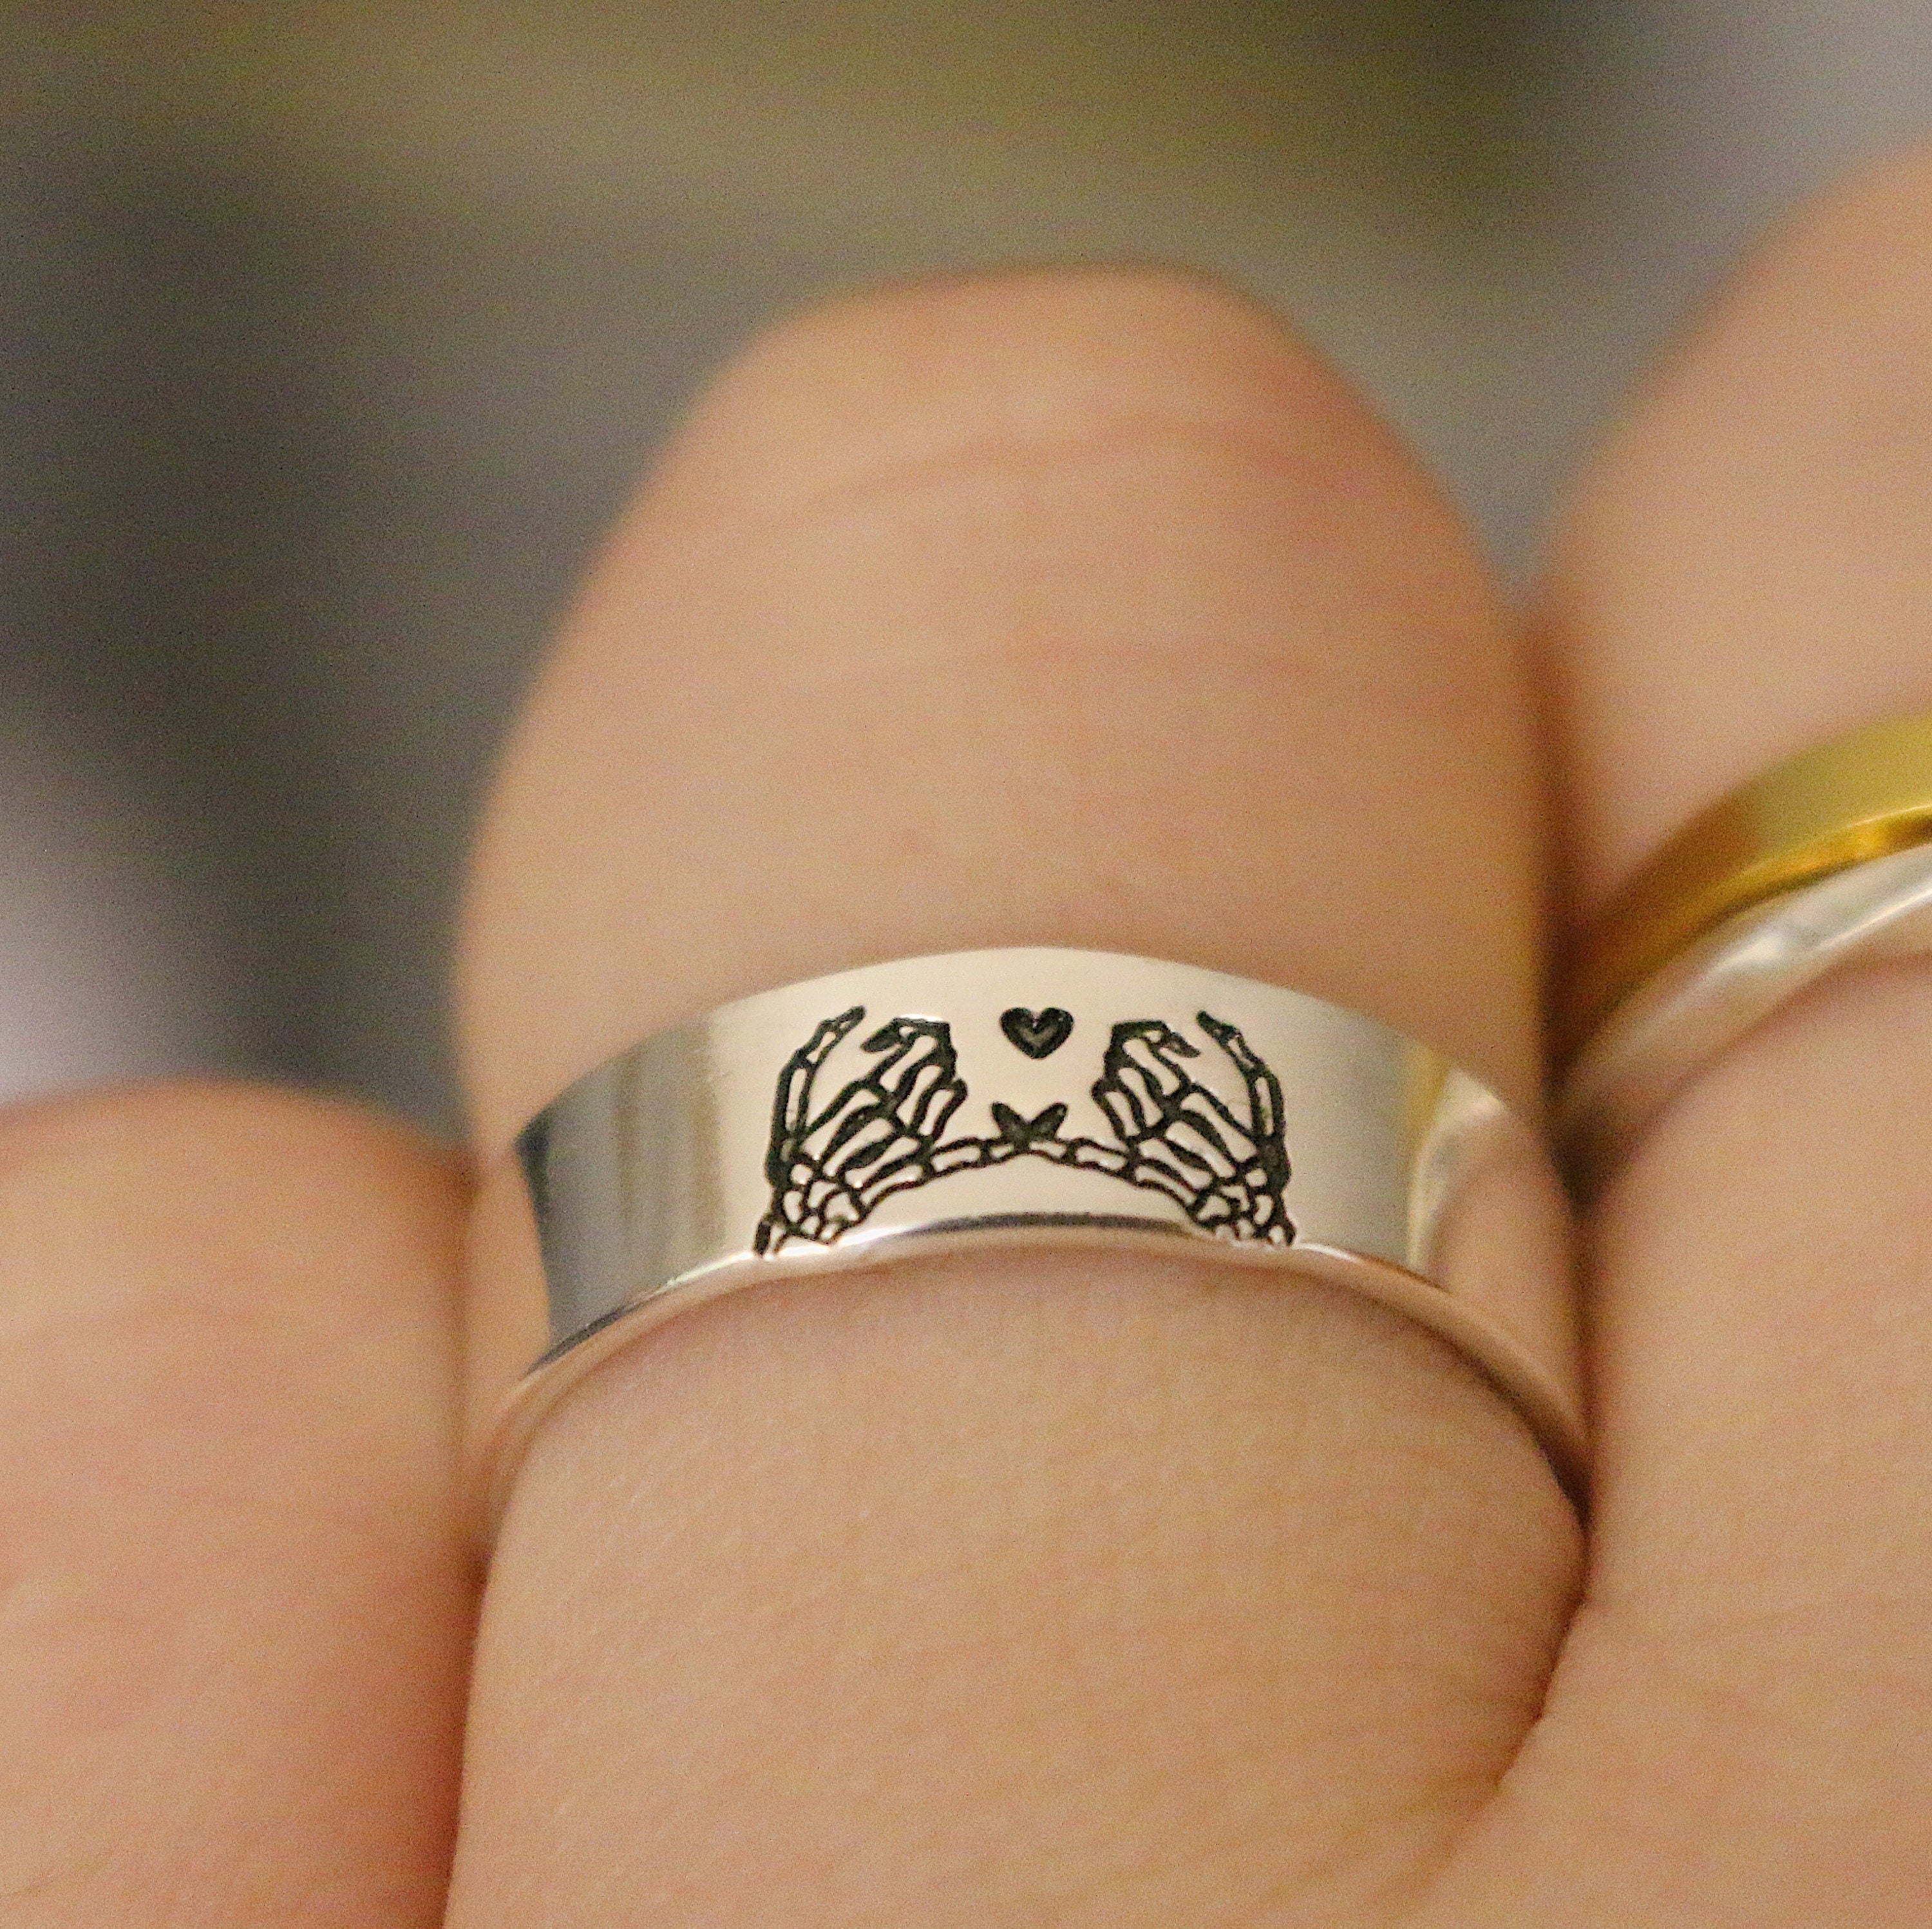 Pick a Couple Ring Design That's Perfect for You & Trend Two-gether